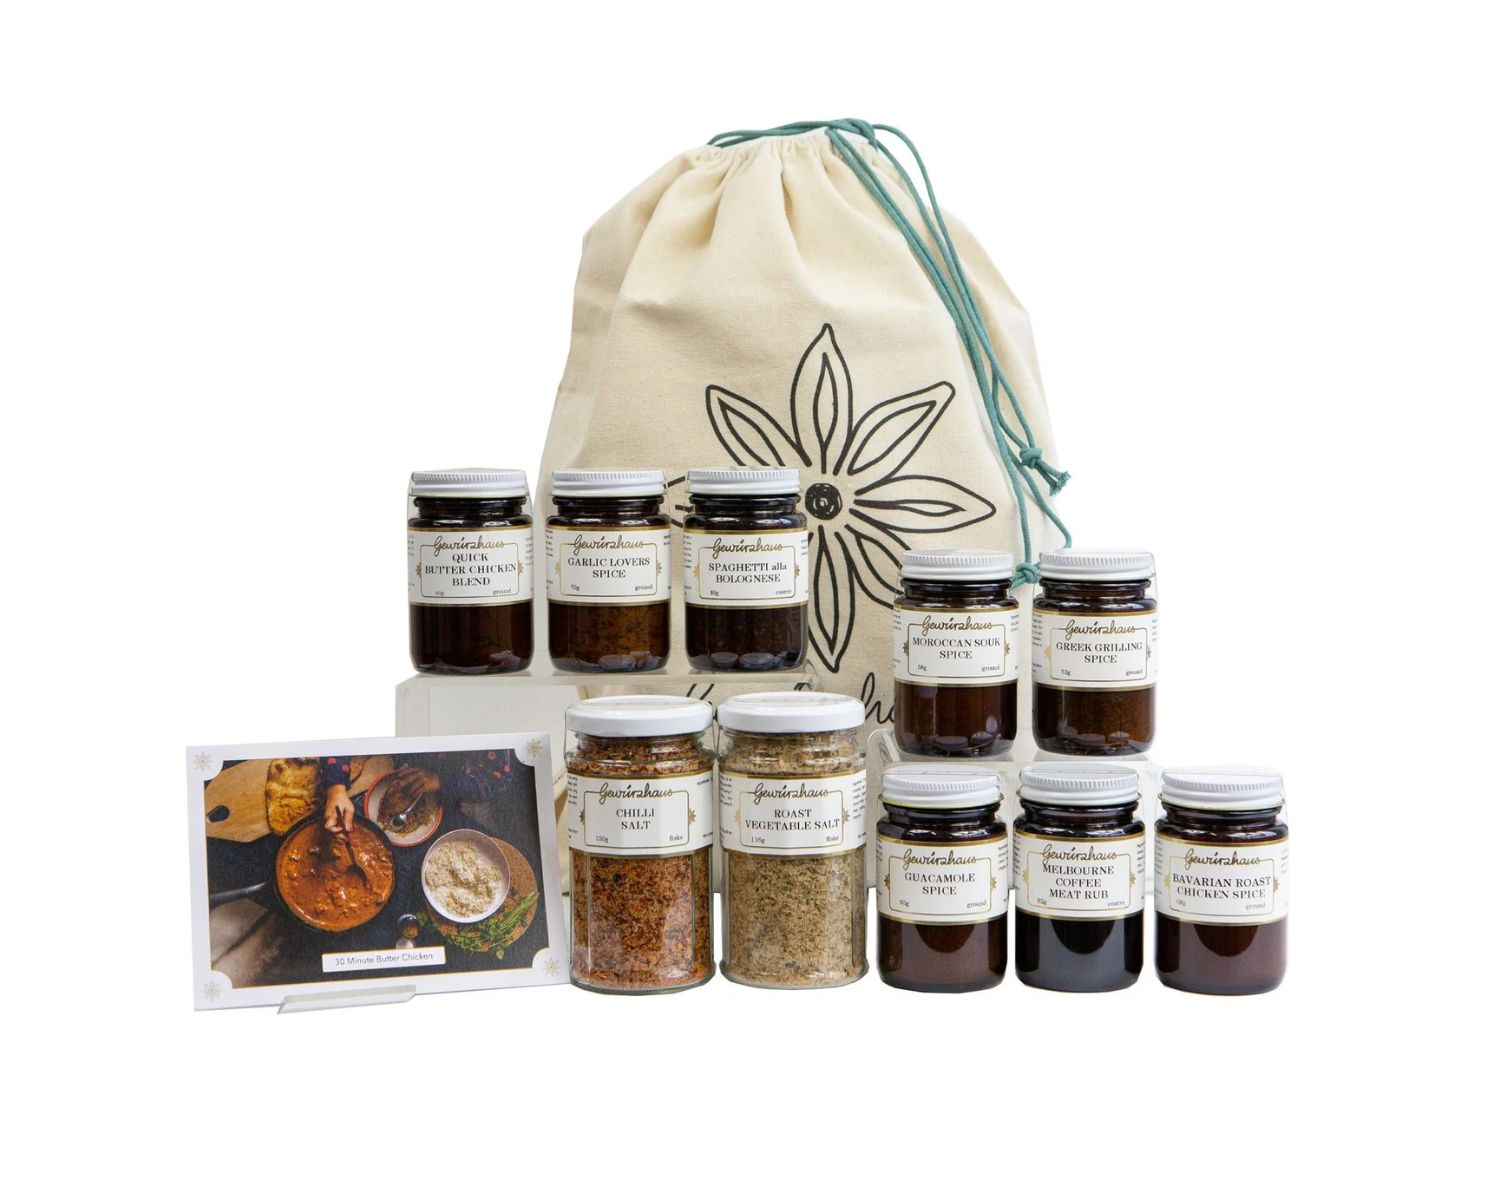 Spice Kit Review: Enhance Your Culinary Skills with this Must-Have Set